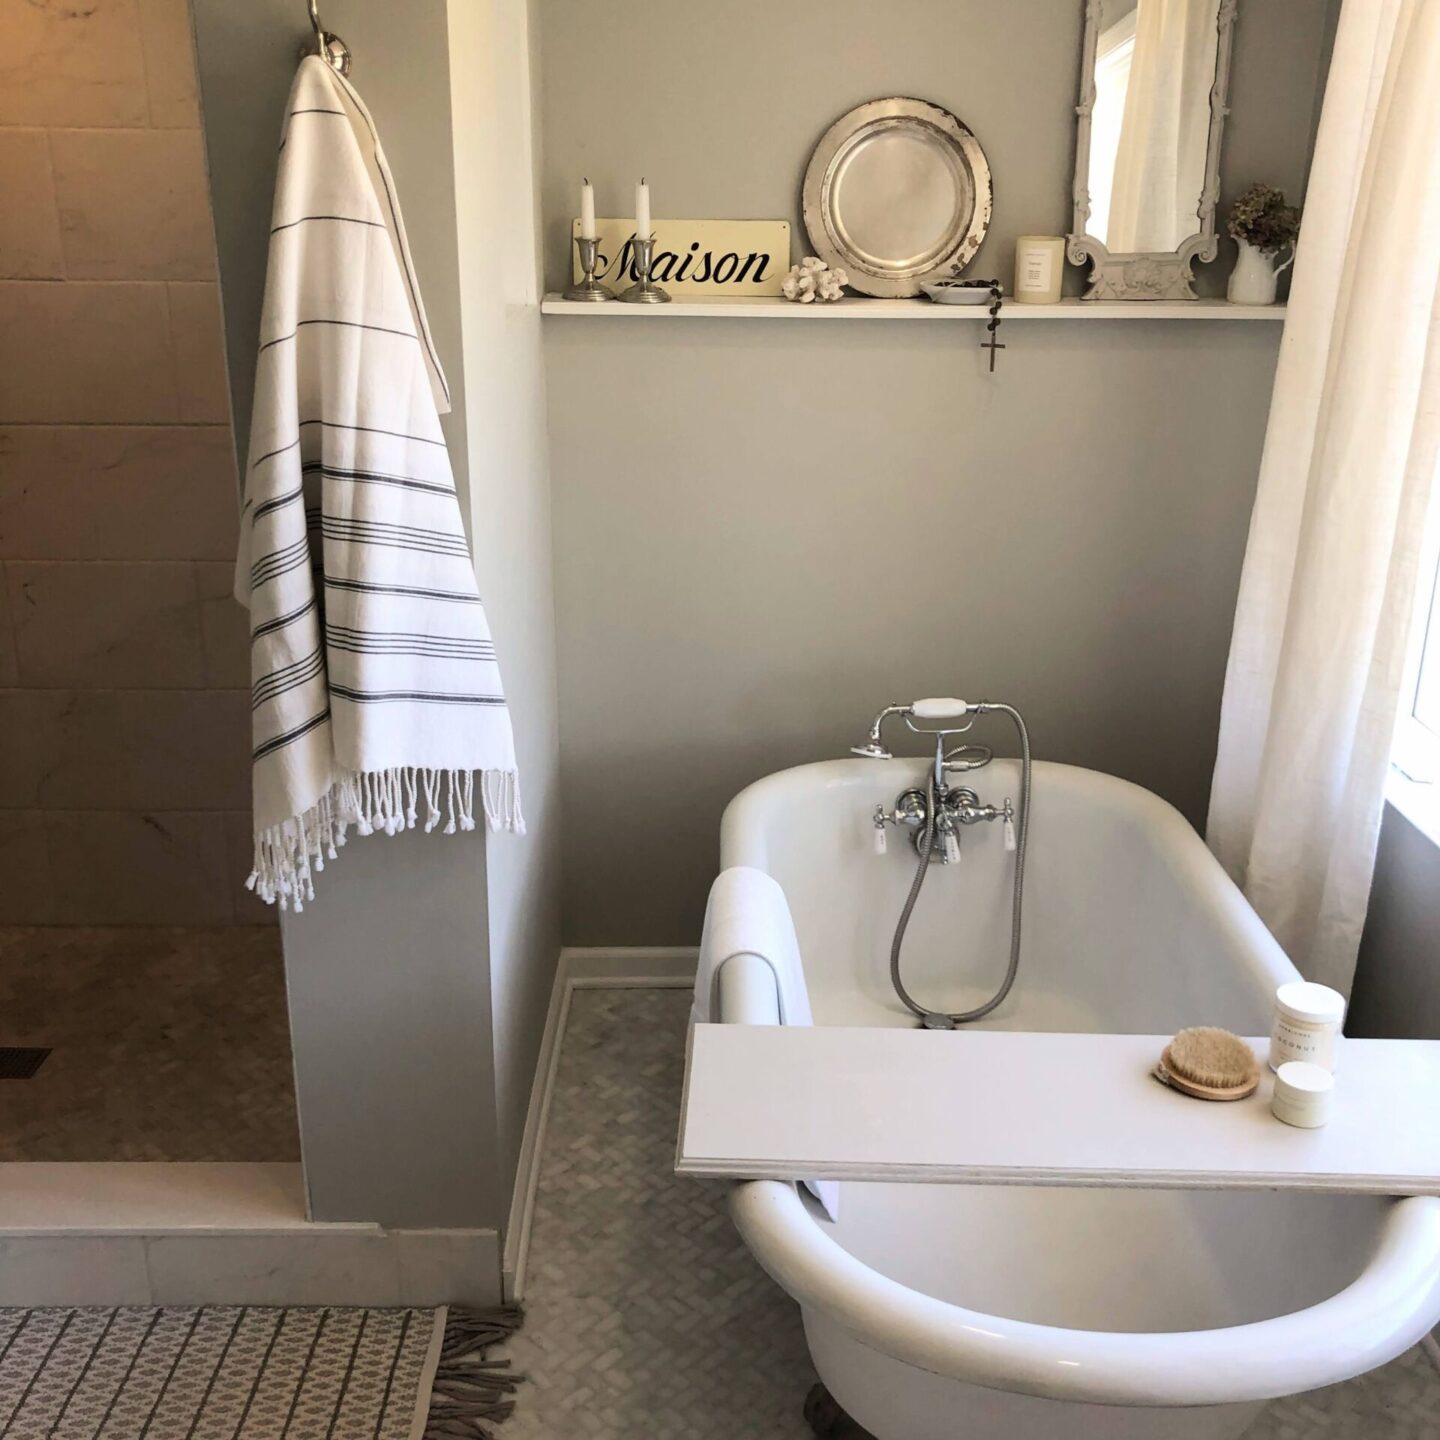 Clawfoot tub in our classic renovated bath at the Georgian - Hello Lovely Studio. #sherwinwilliamsreposegray